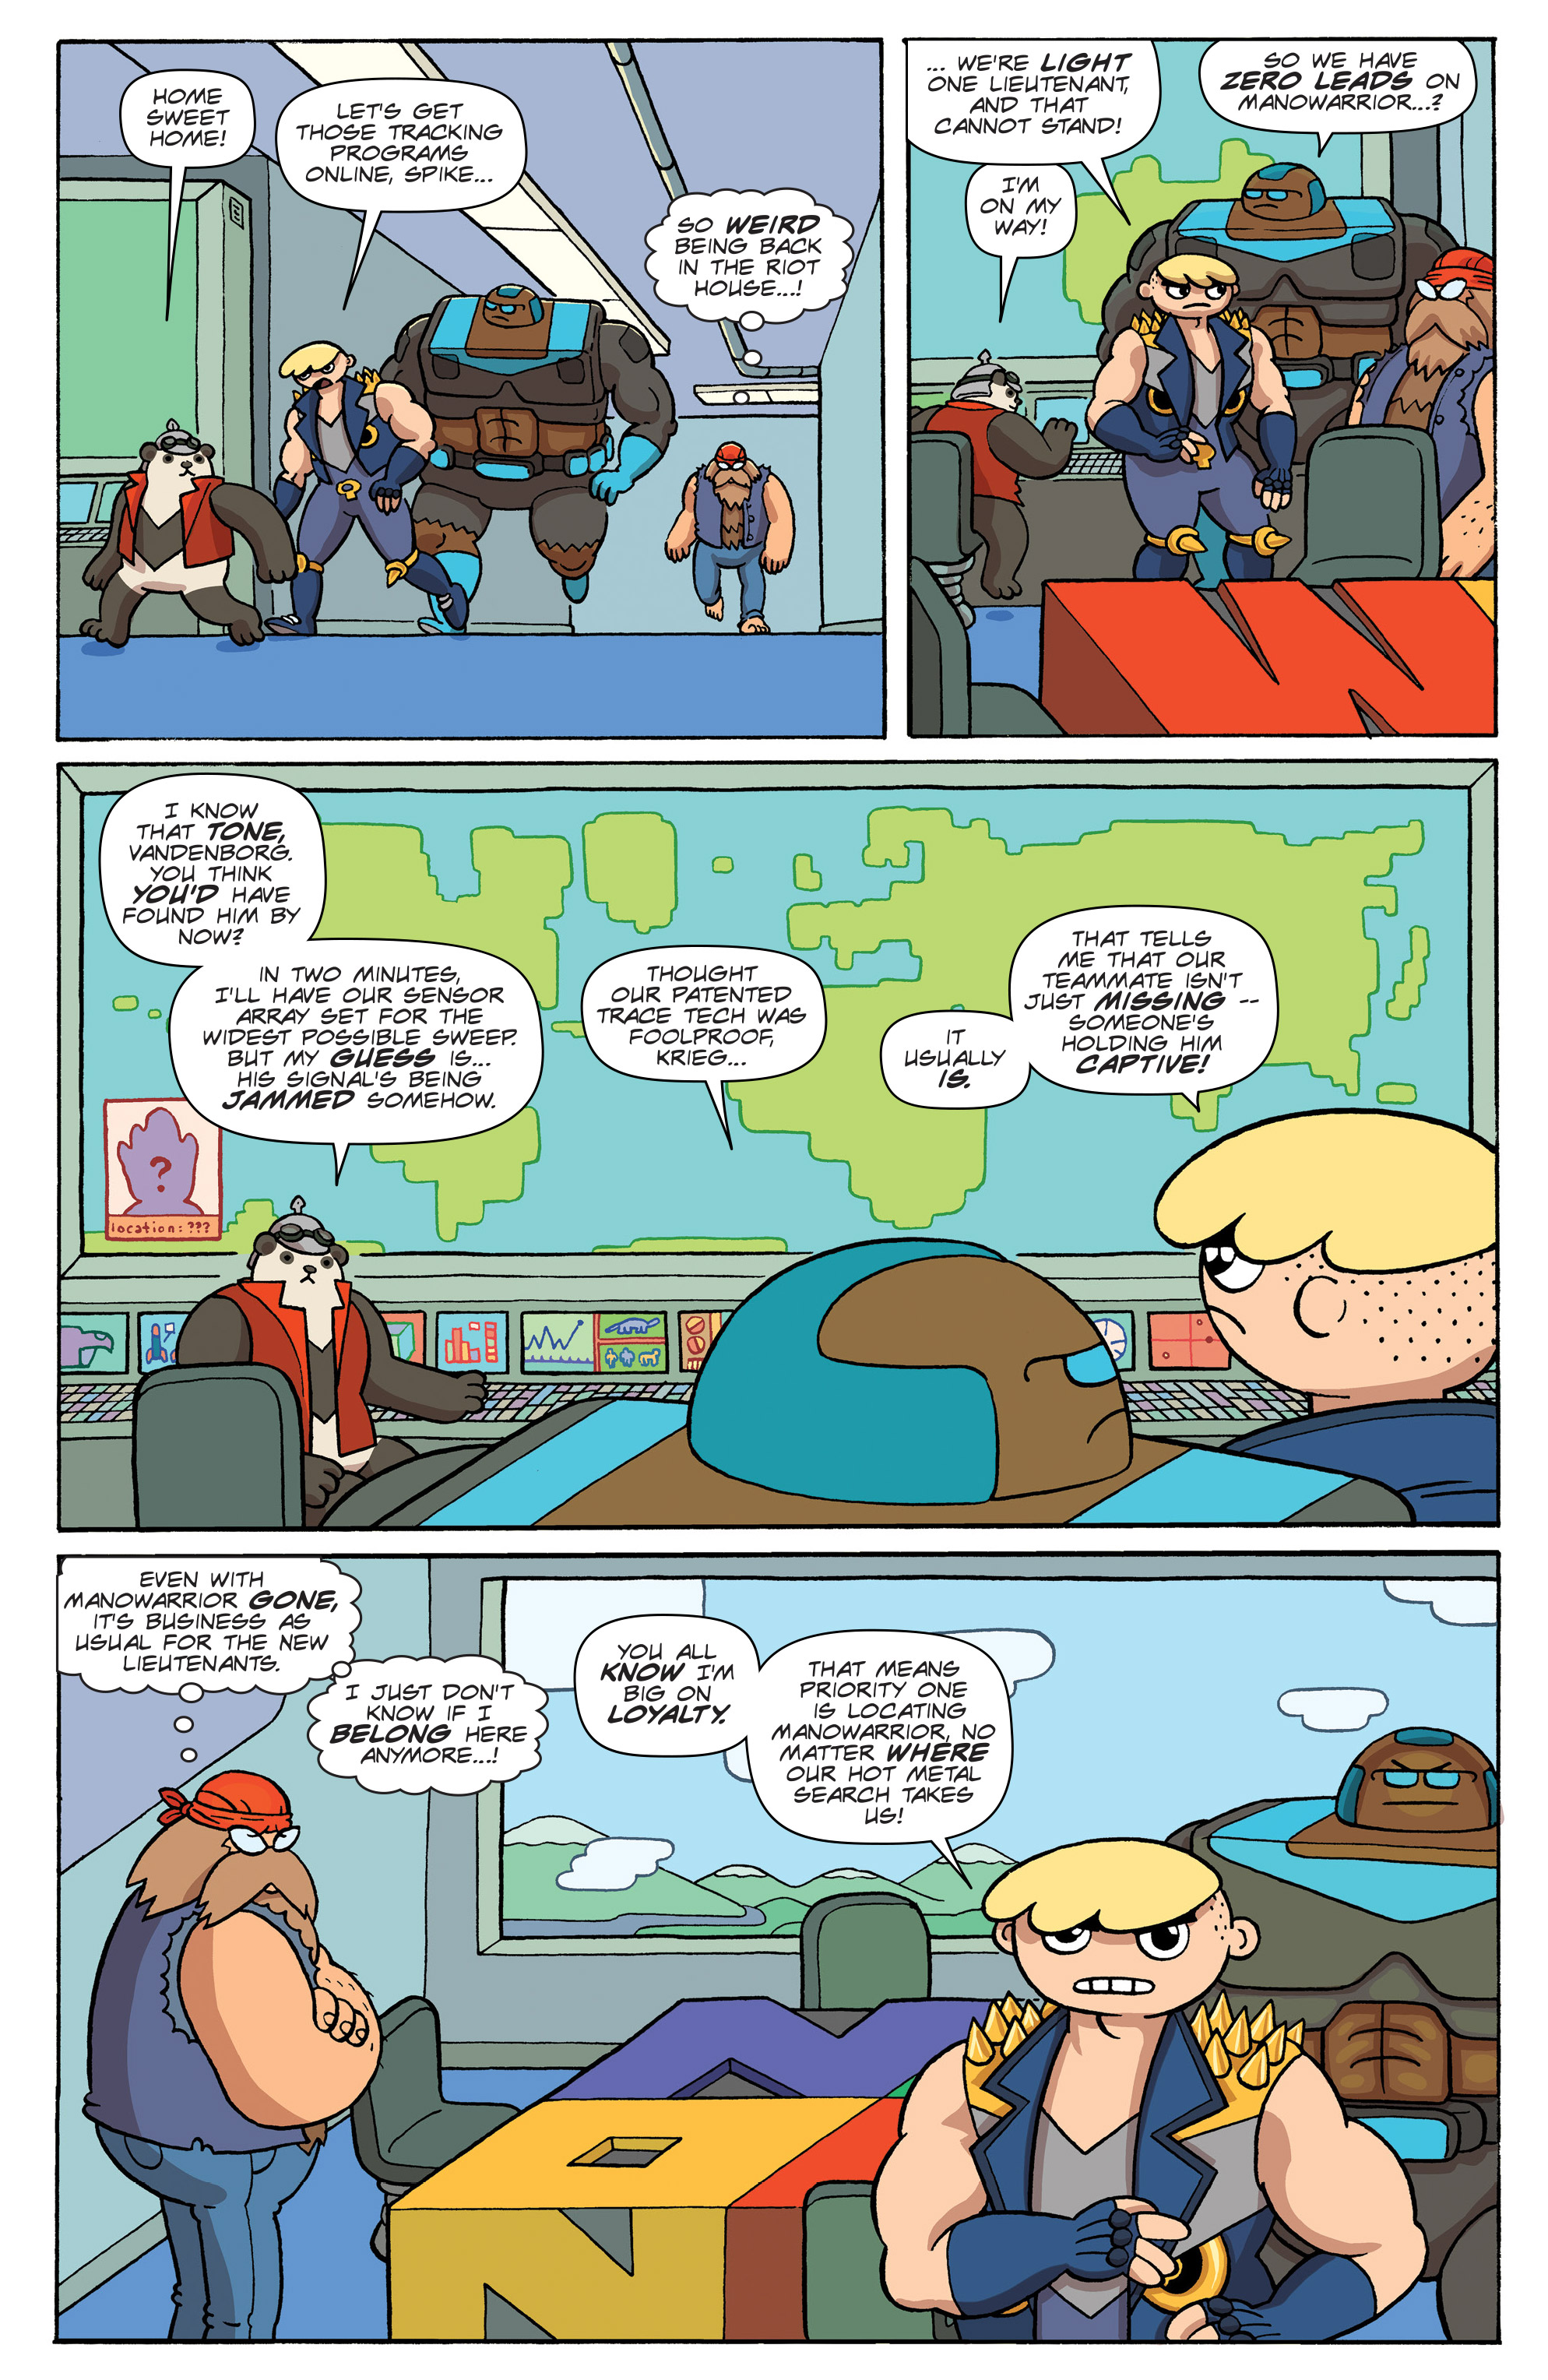 New Lieutenants of Metal (2018-): Chapter 2 - Page 4